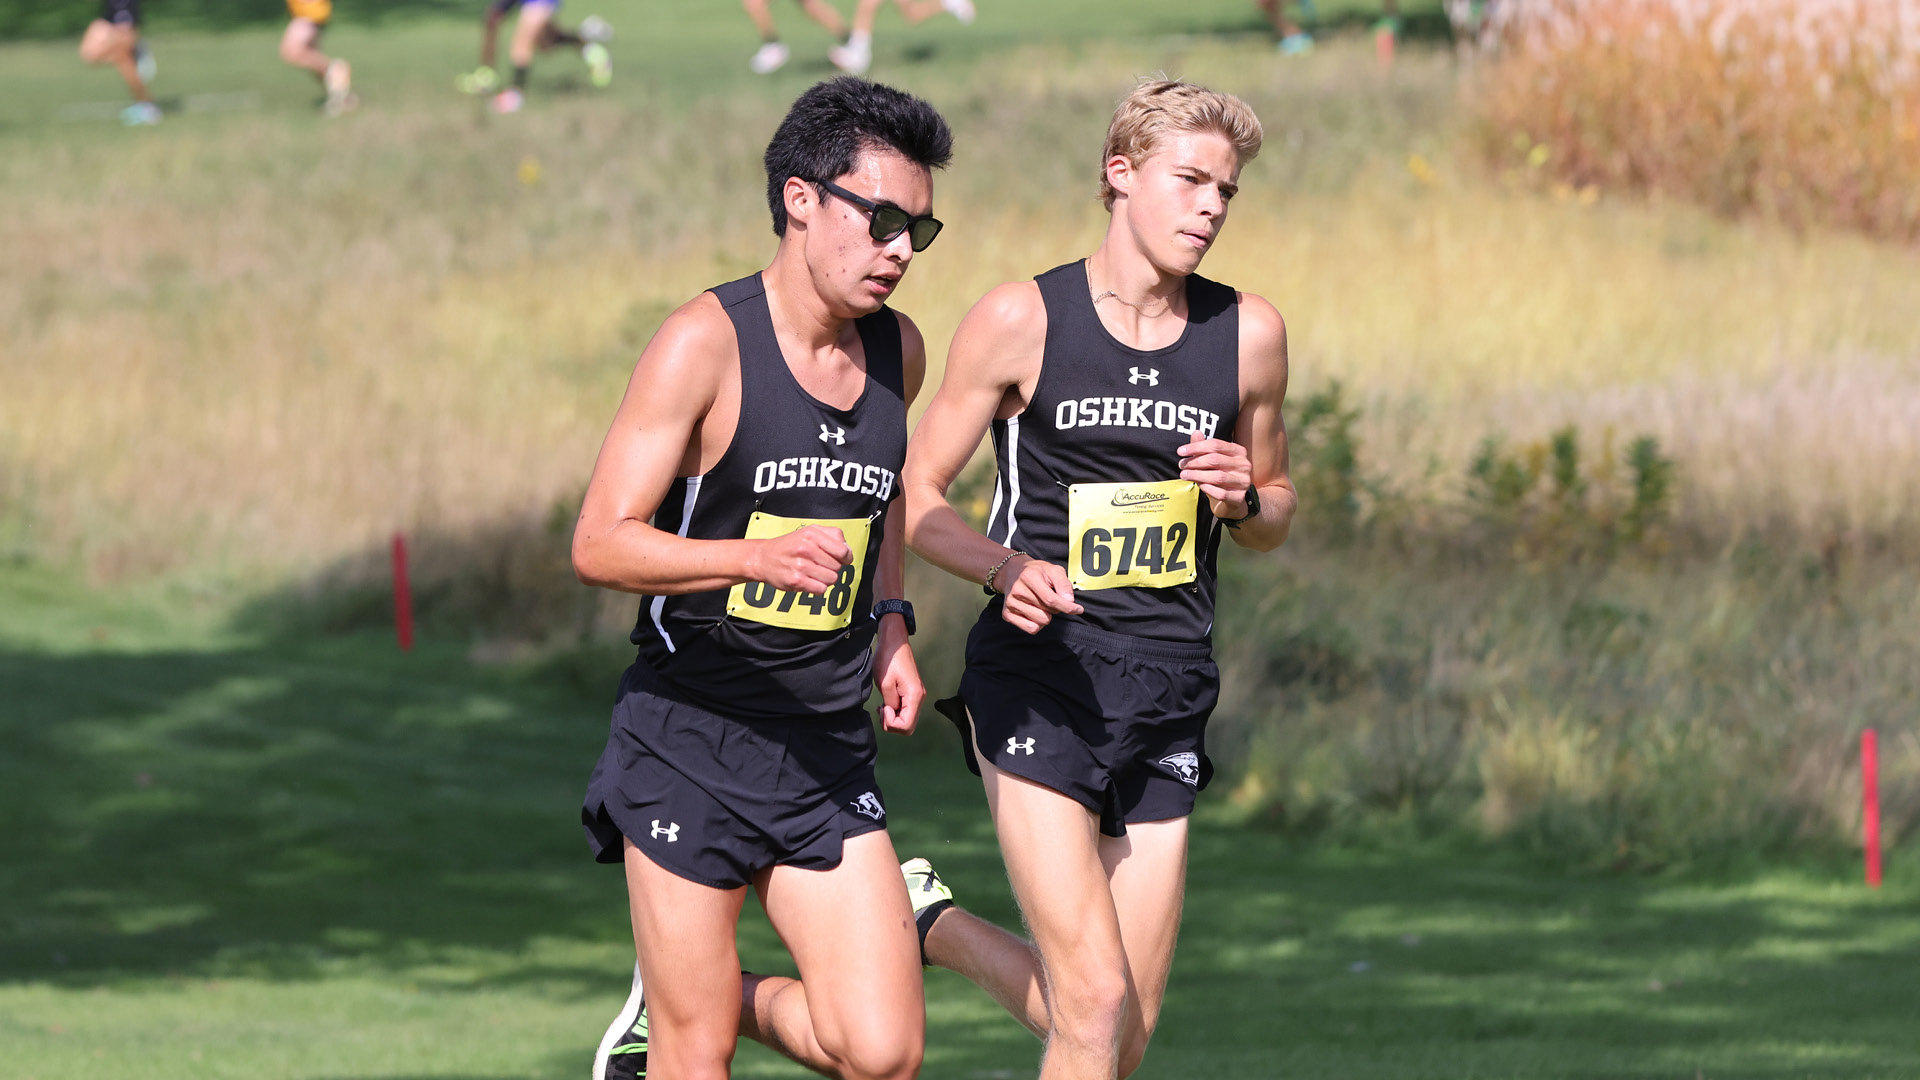 Joe Kehoe (left) and Cameron Cullen (right) were the fifth- and second-fastest Titan runners at the Blugold Invitational